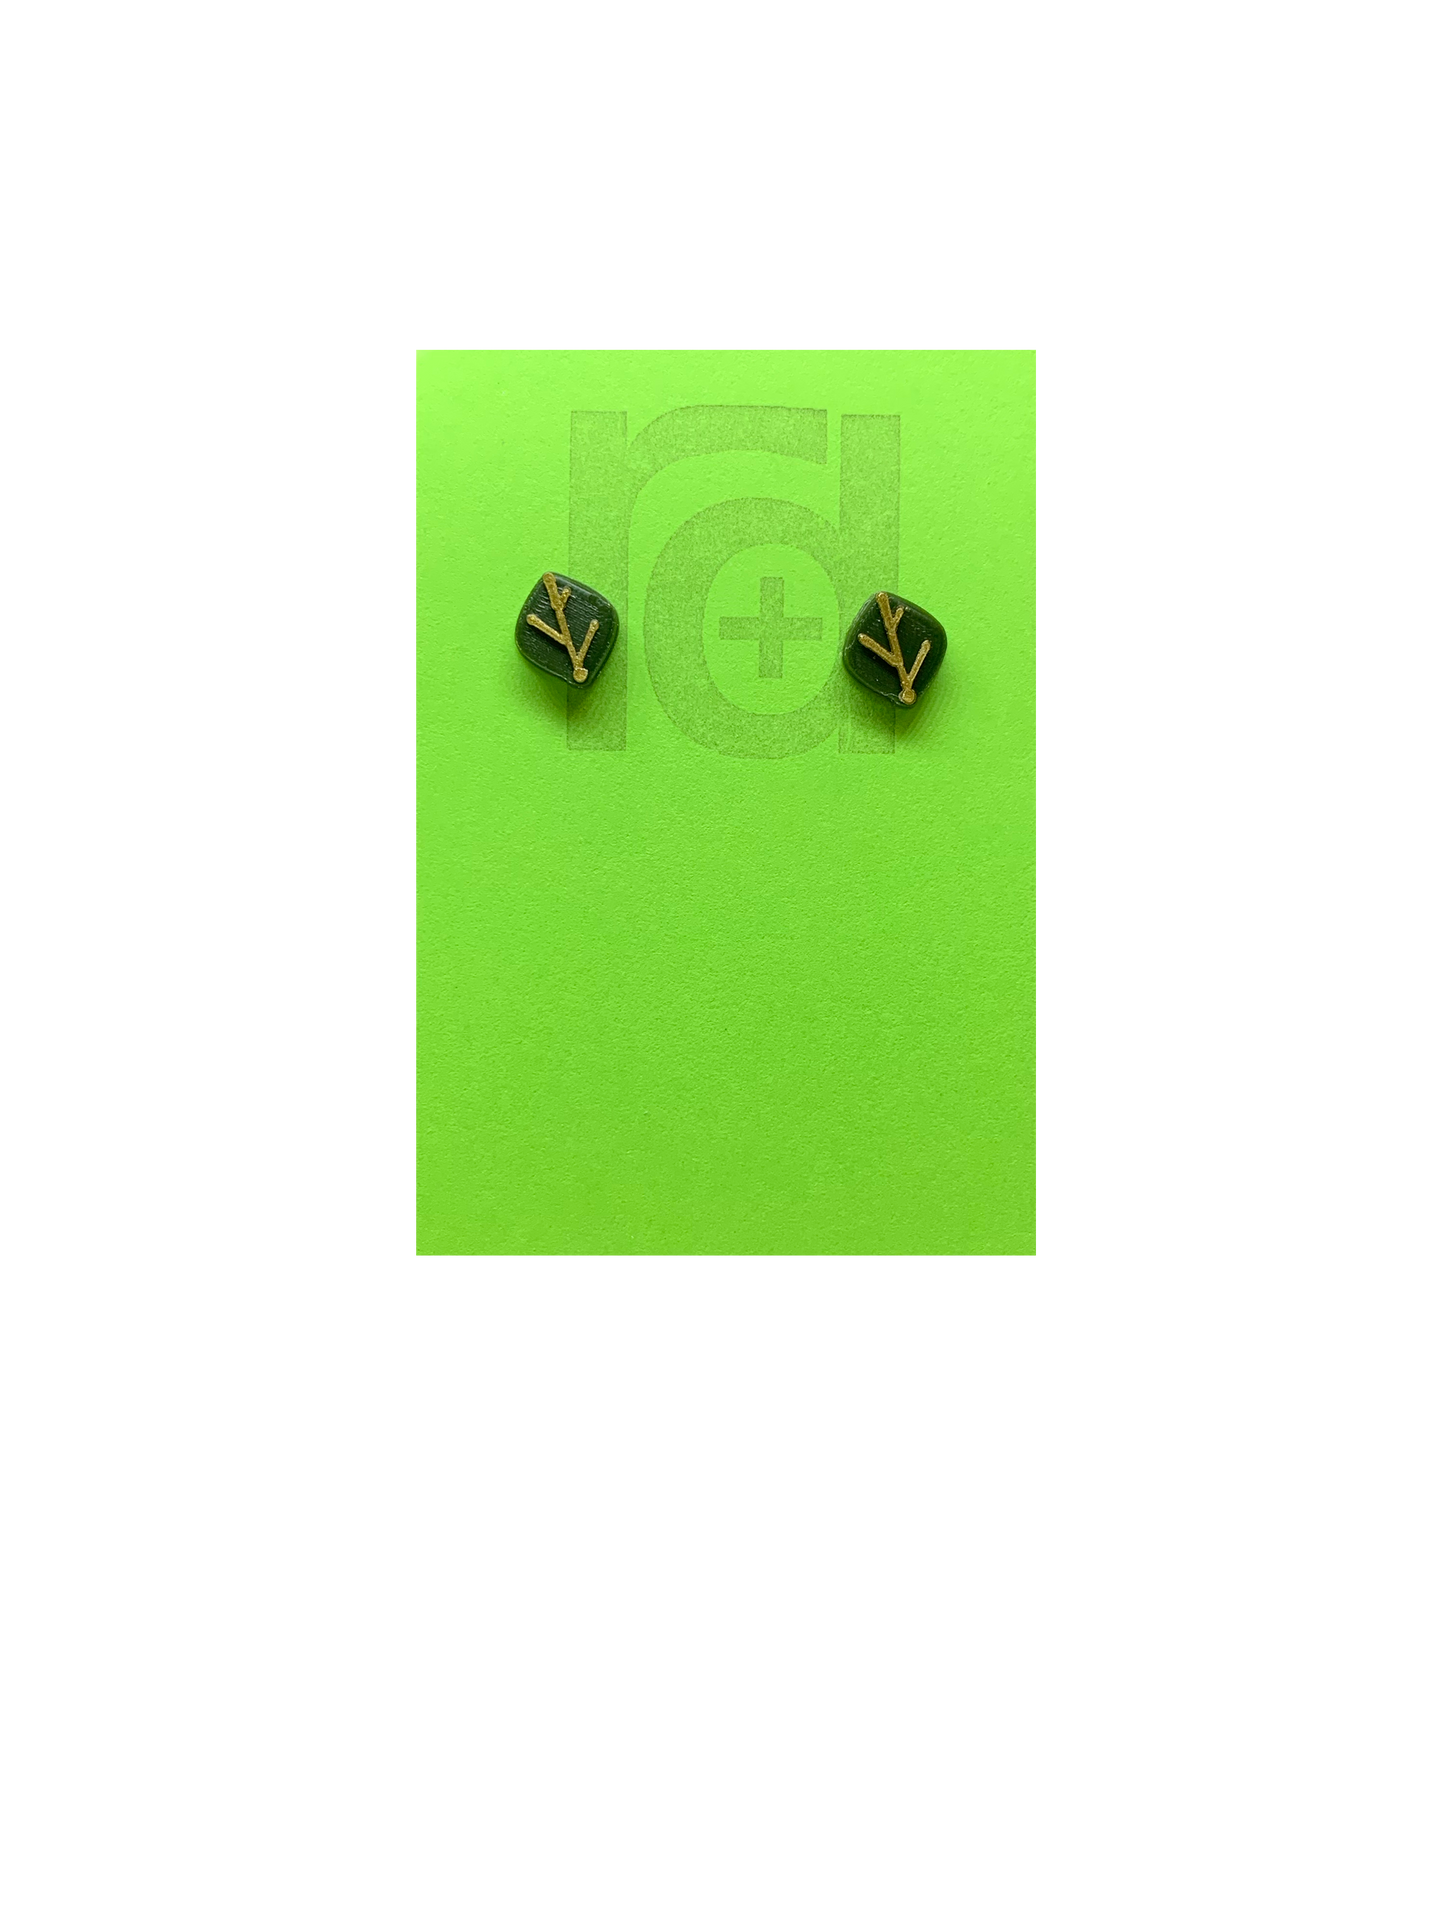 On a bright green earring card are 2 studs shaped as leaves. Each leaf is a olive green color and has veins that are gold. Not only do theres 3D printed earrings look like plants, they're made from them!